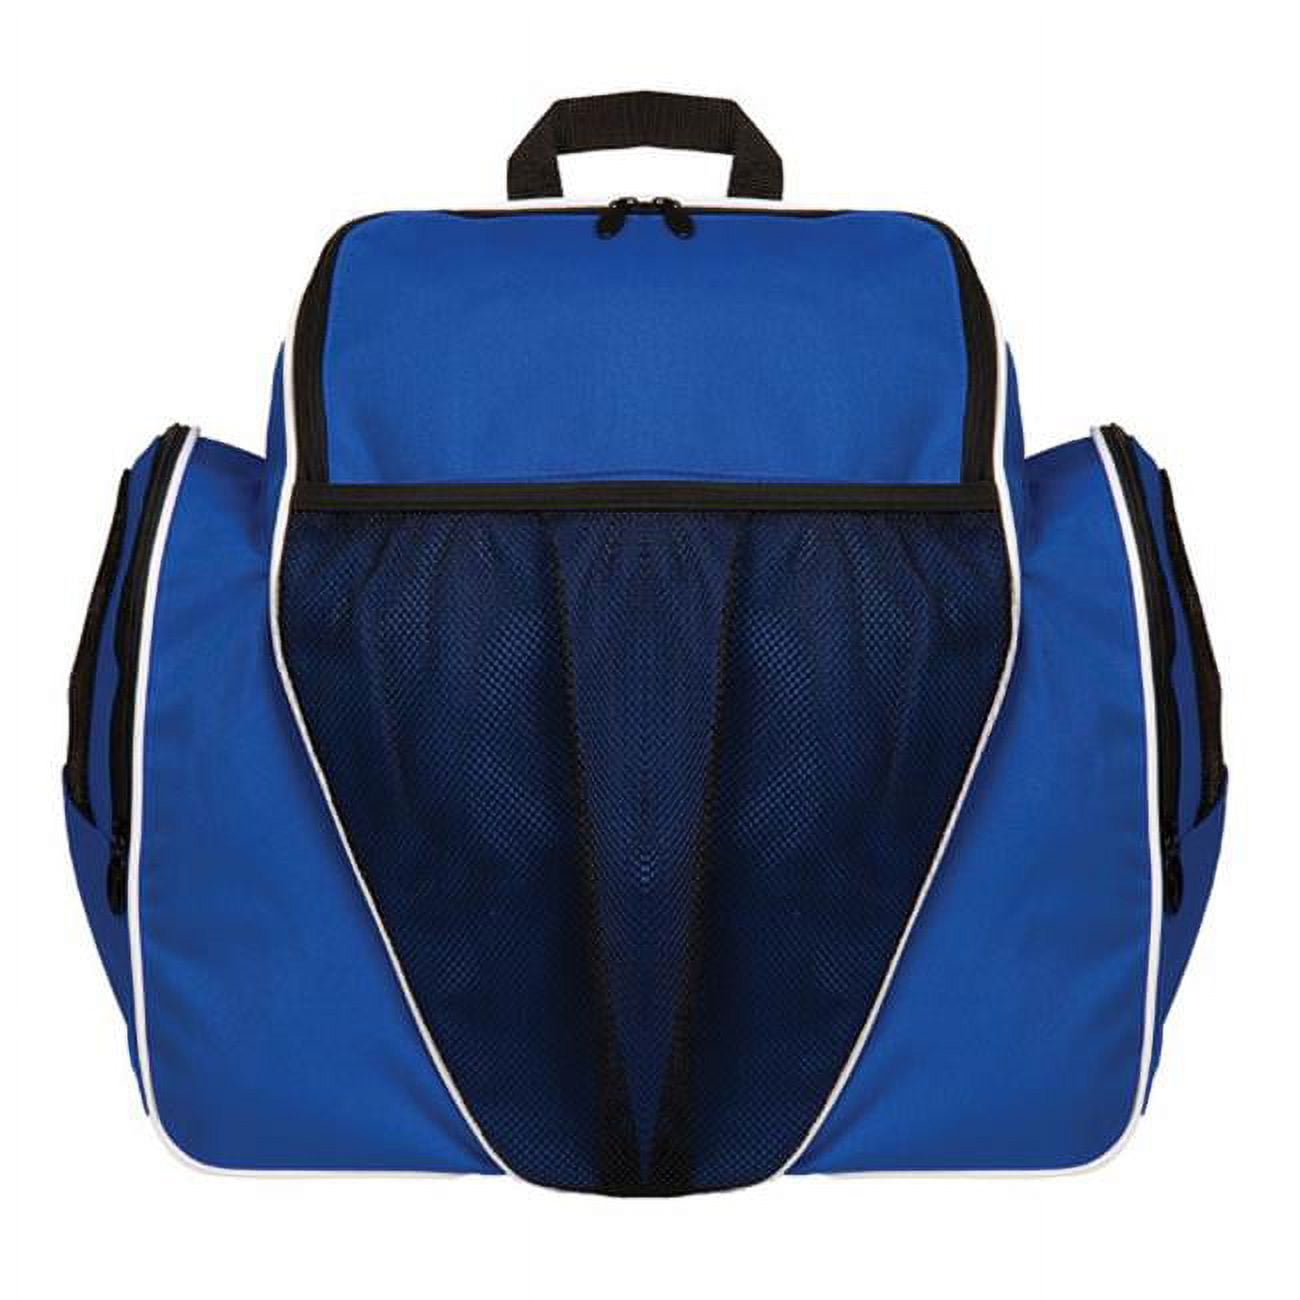 Bp1810bl 18 X 19 X 10 In. Deluxe All Purpose Backpack, Royal Blue